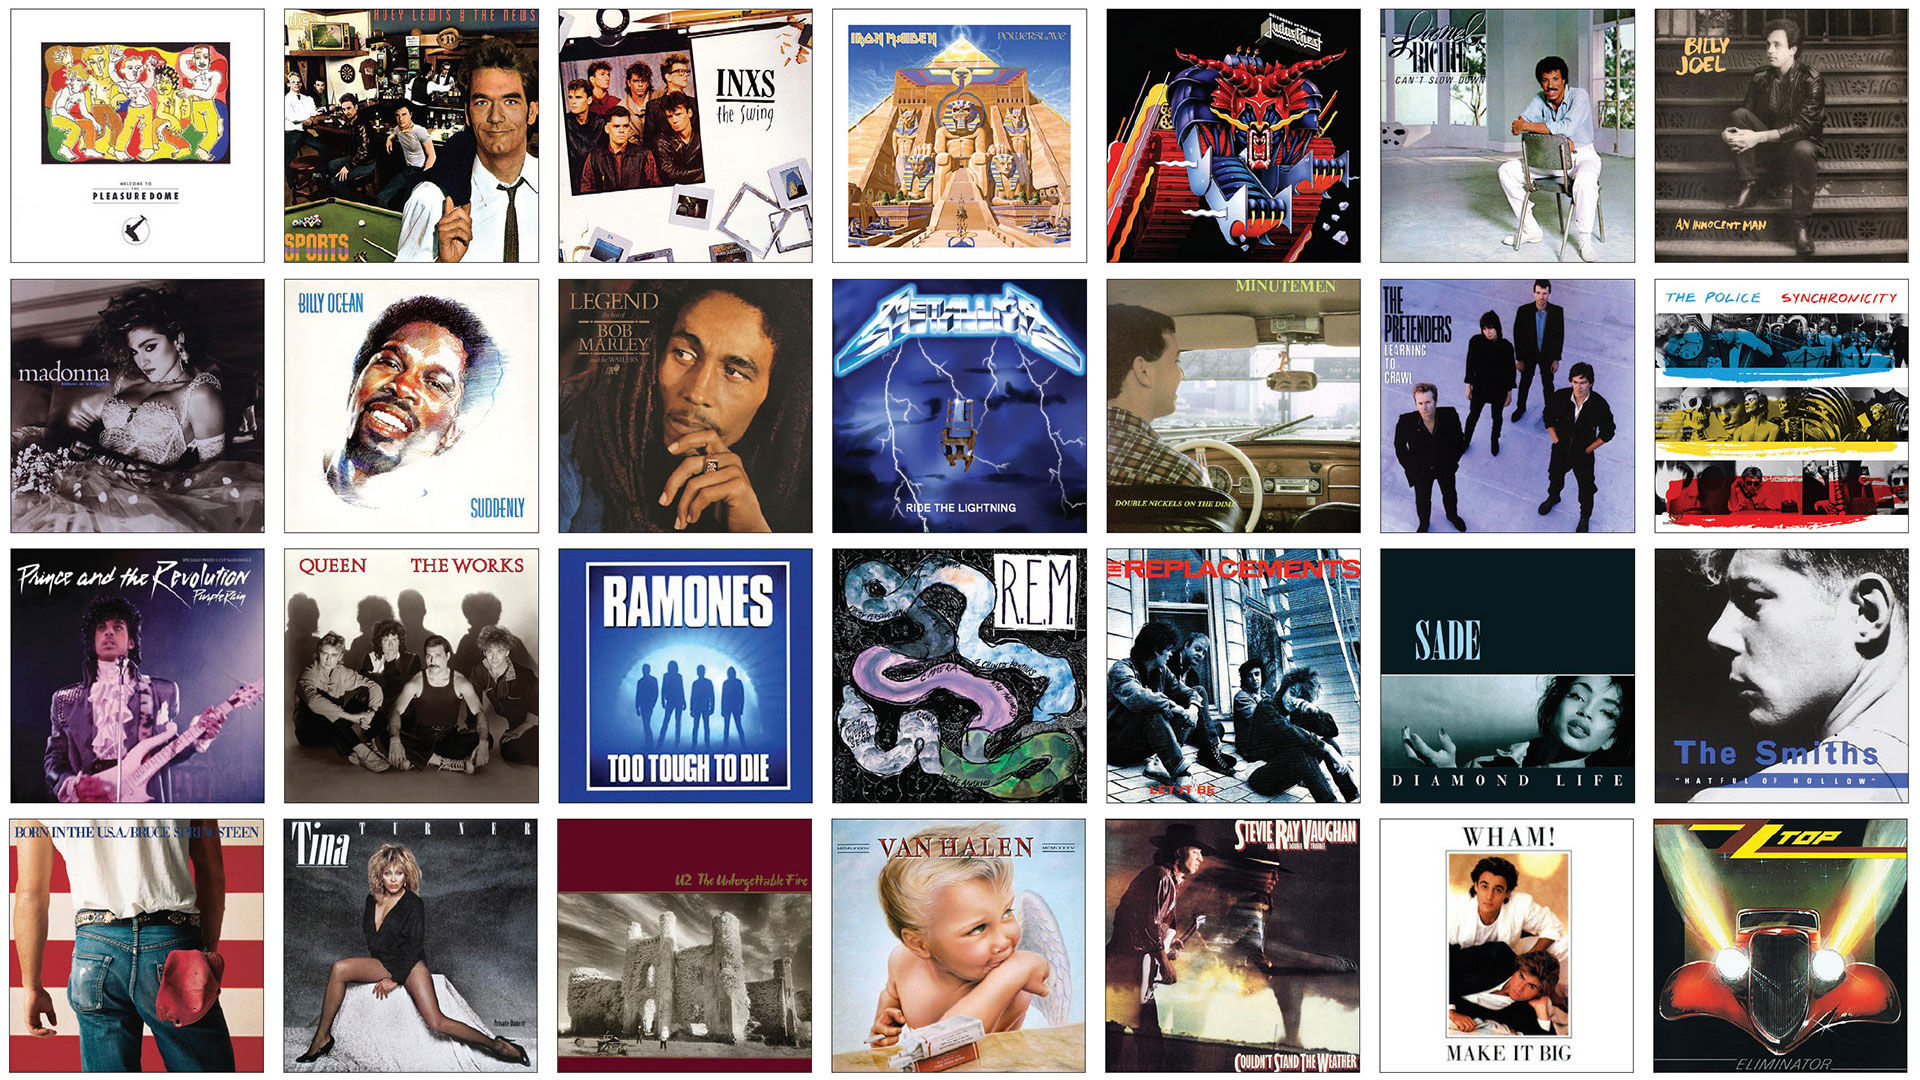 A grid of popular album covers used for back of name tags.